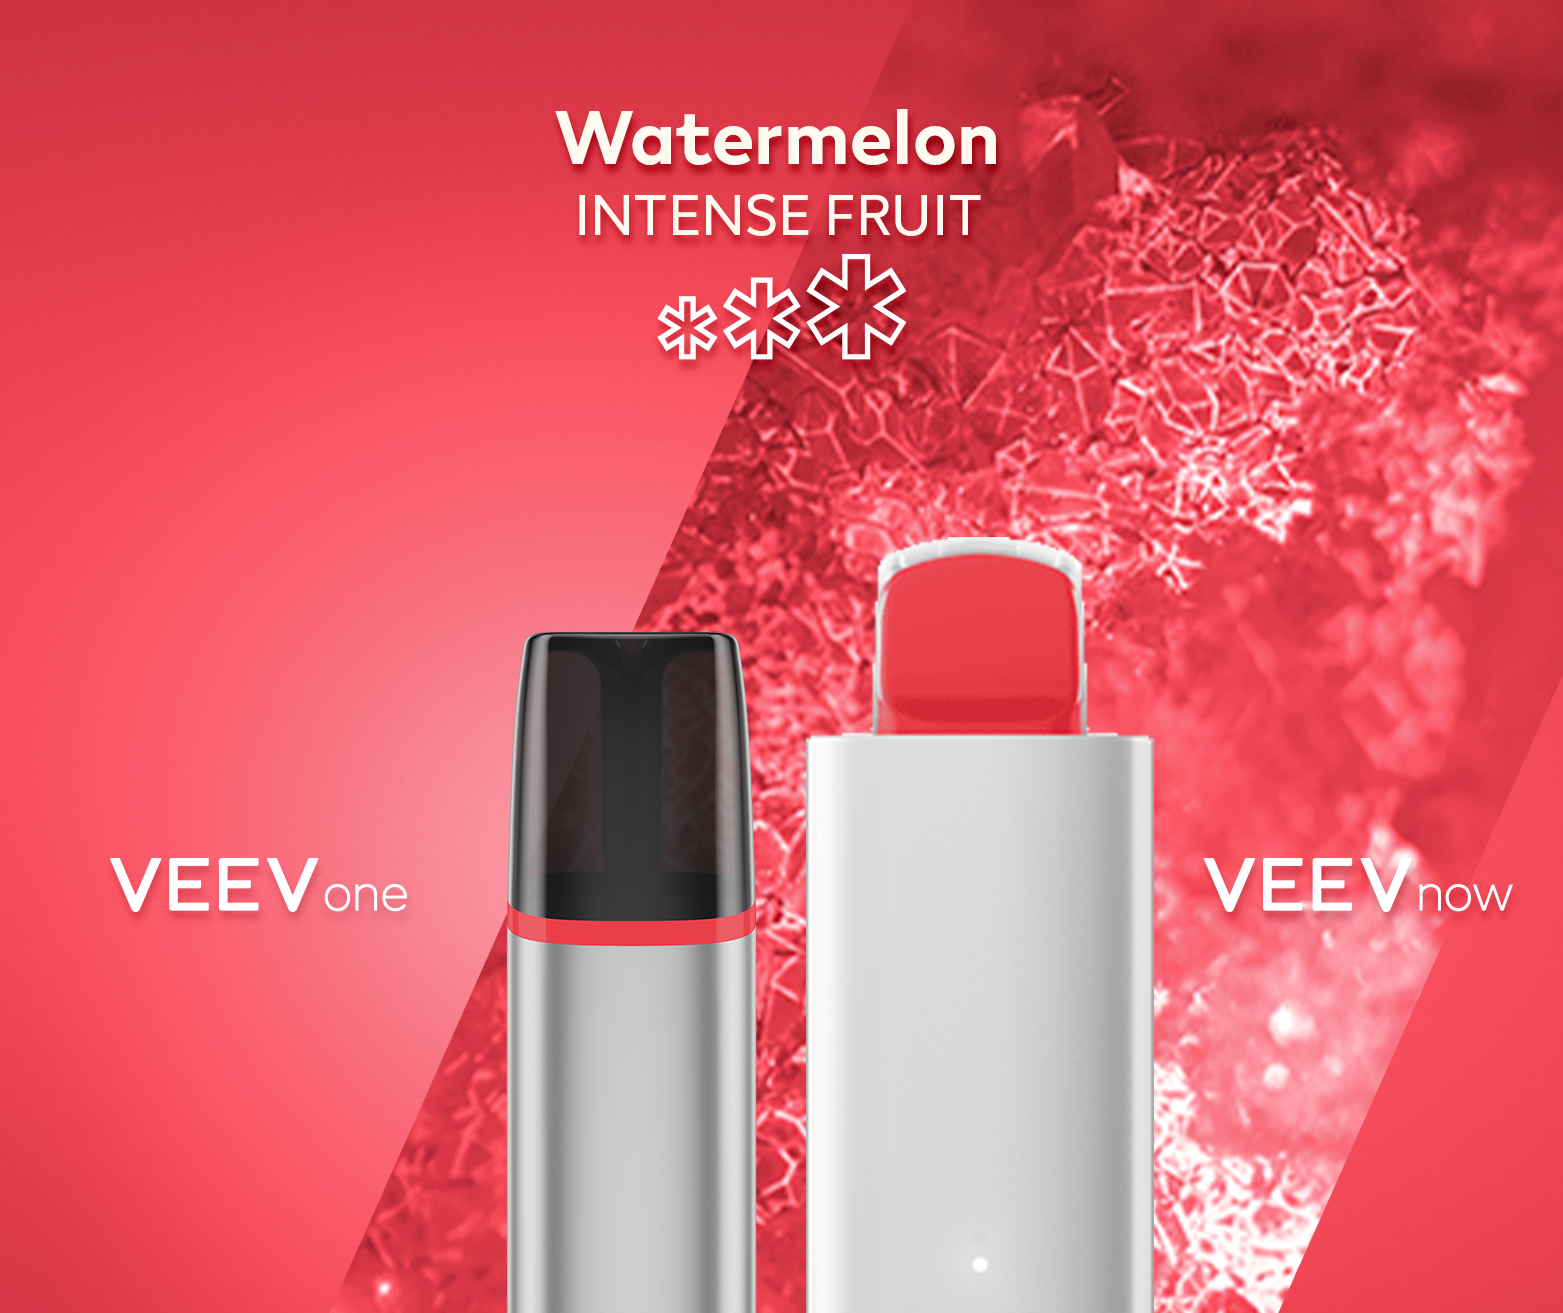 Watermelon VEEV ONE device and VEEV NOW 5 mL disposable- Intense Fruit